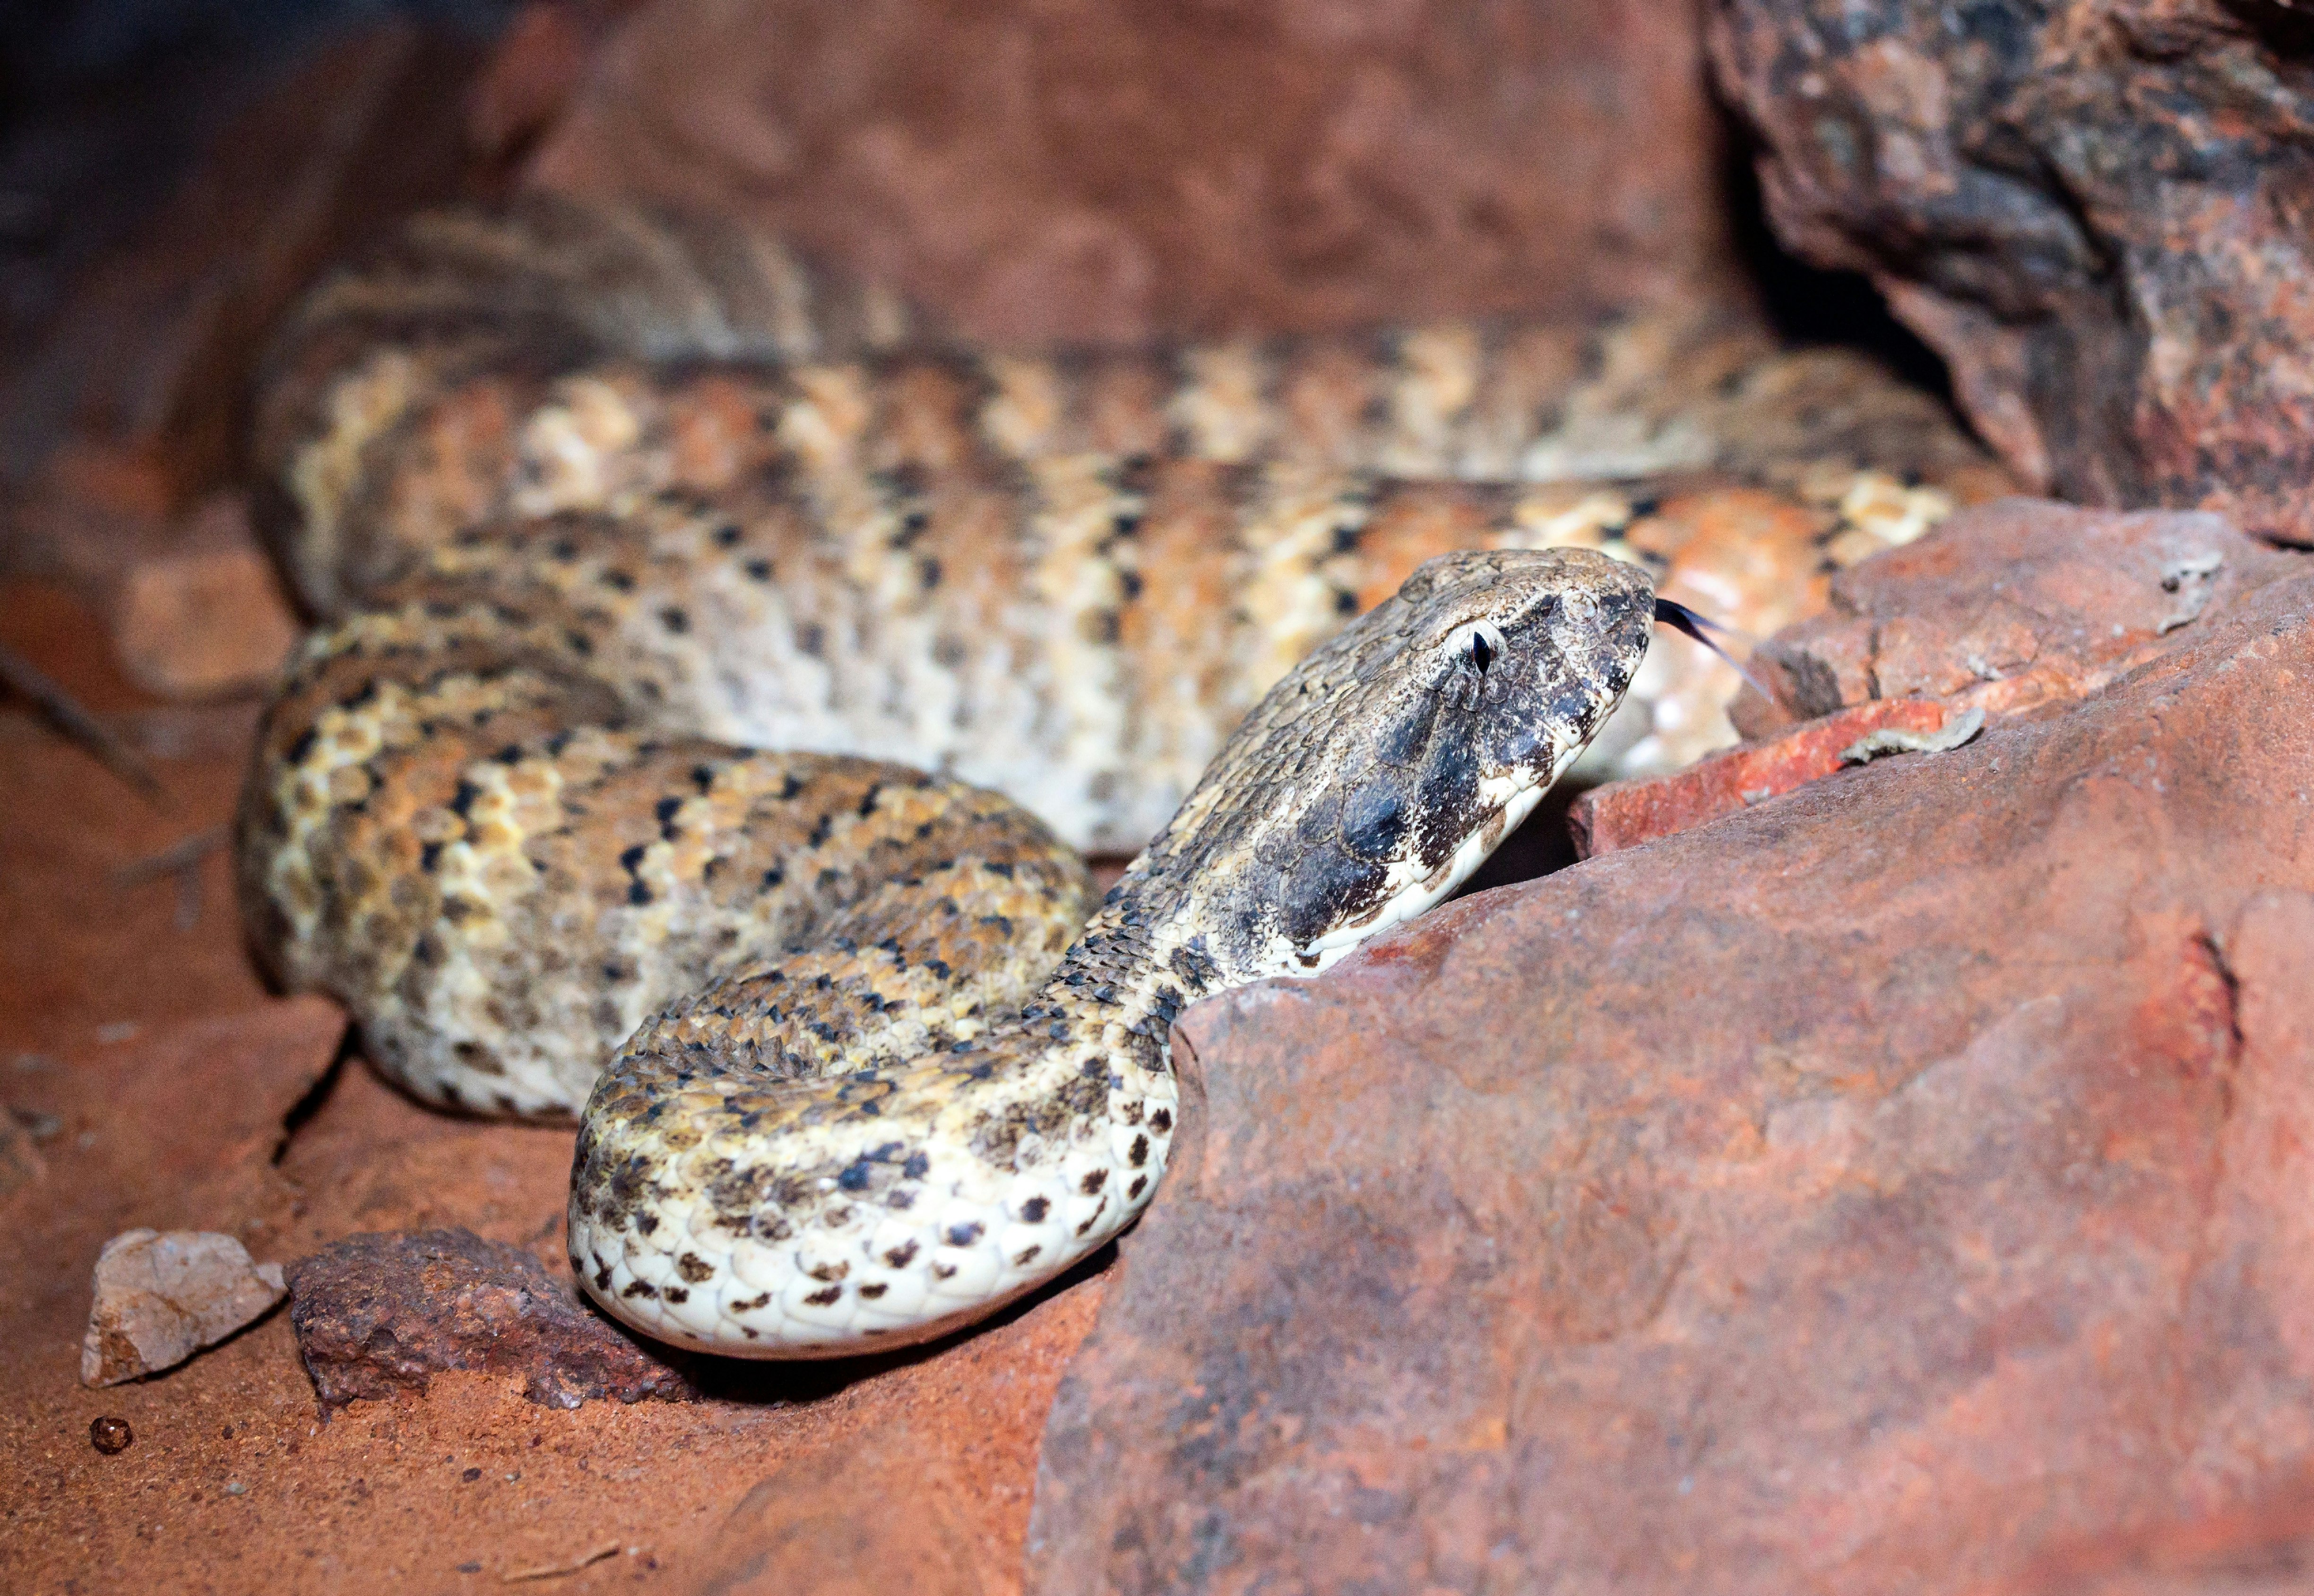 The soils and rocks of the Australian Outback are commonly a reddish colour from the high iron content. This is the Central Australian colour form of the death adder and its camouflage pattern works well in the Red Centre of Australia.